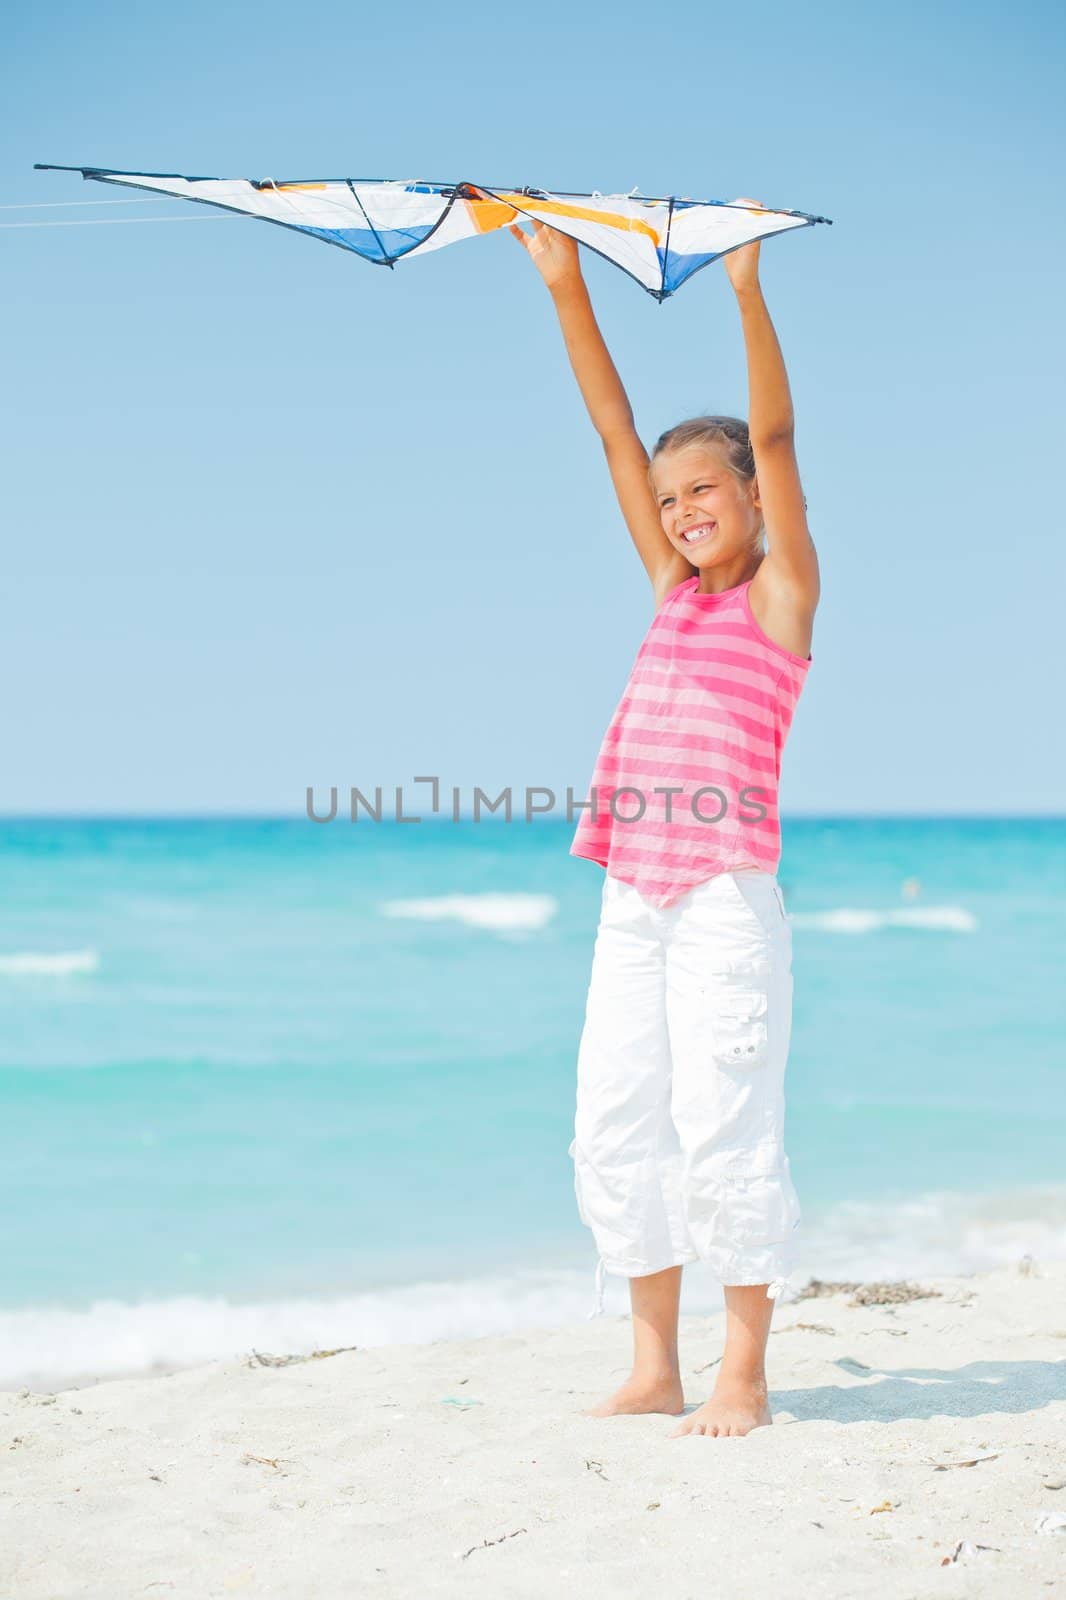 Young cute girl playing with a colorful kite on the tropical beach. Vertical view